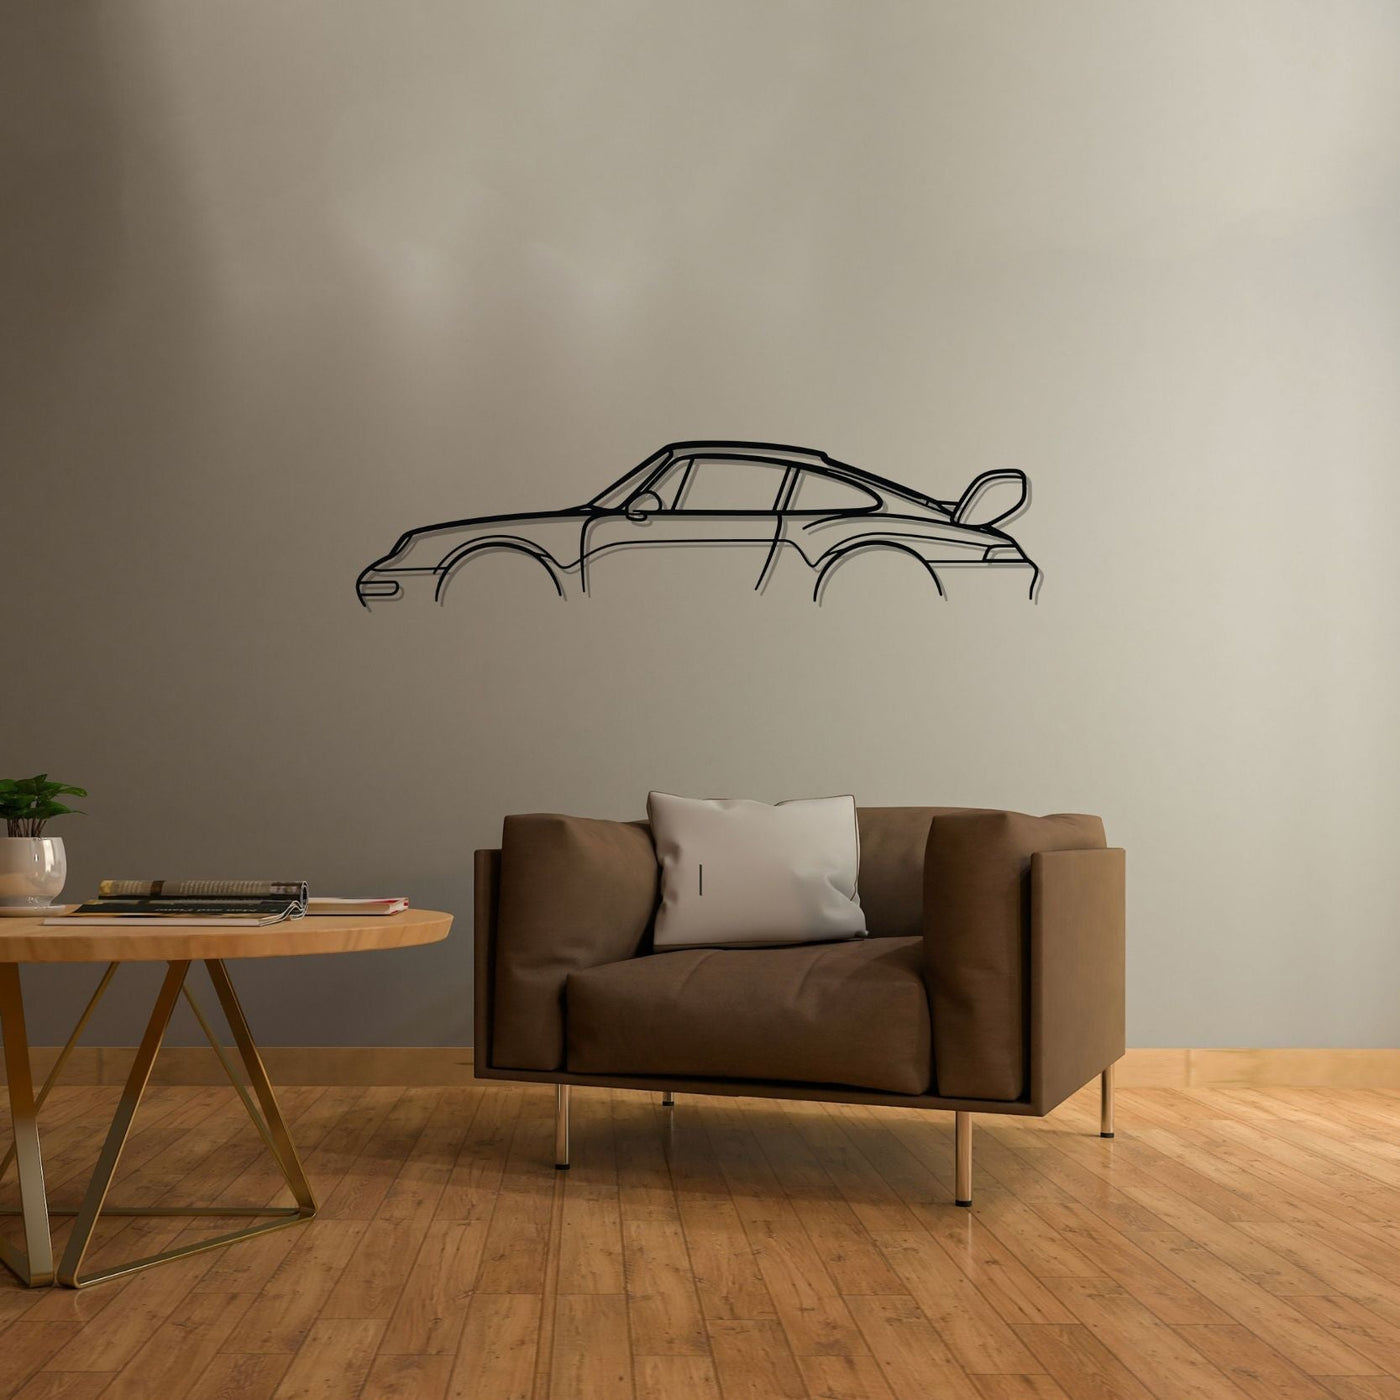 911 RS Clubsport Model 993 Classic Silhouette Metal Wall Art